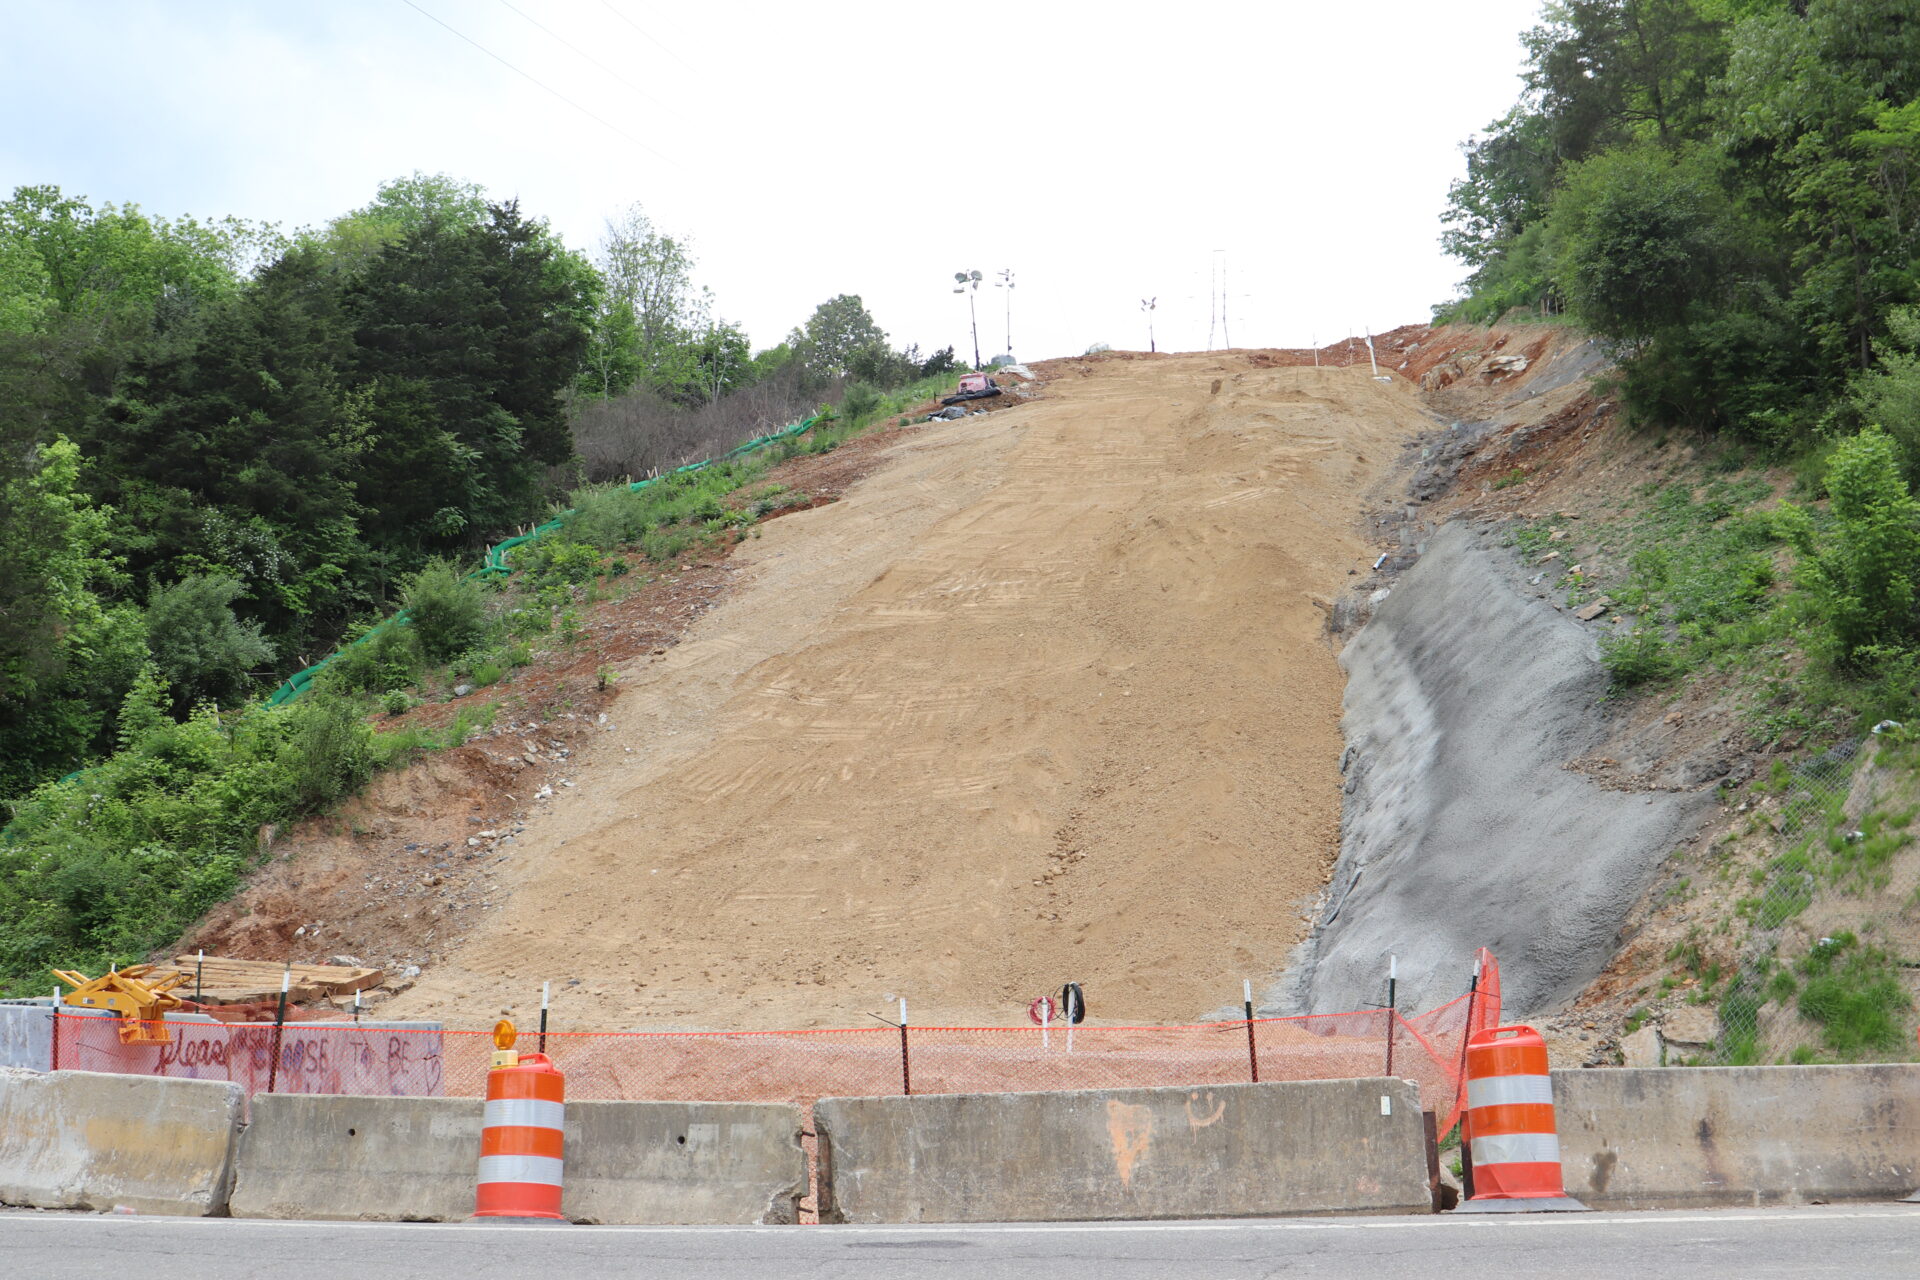 A steep earthen slope is viewed from a county road with concrete barriers and two orange and white construction barrels at the bottom.